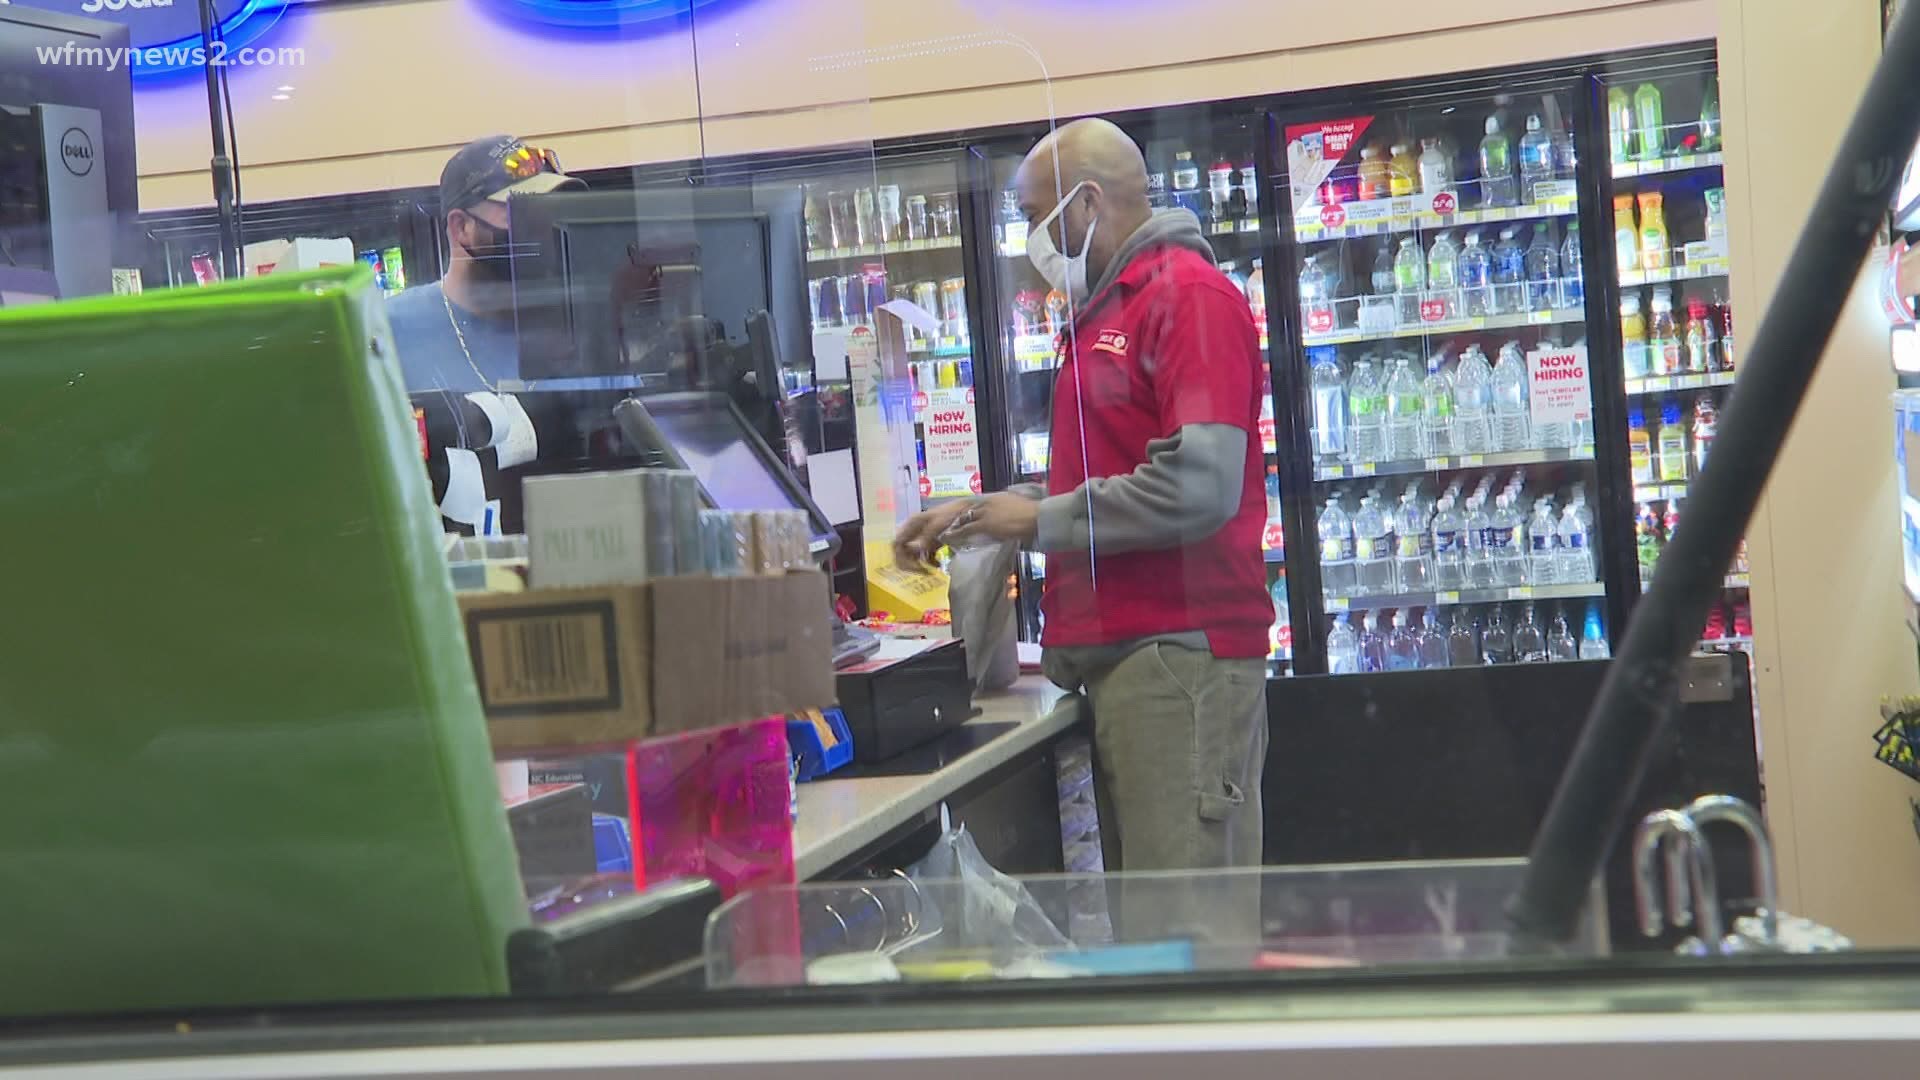 A Circle K gas station clerk shares what he would do if he hit the lottery.